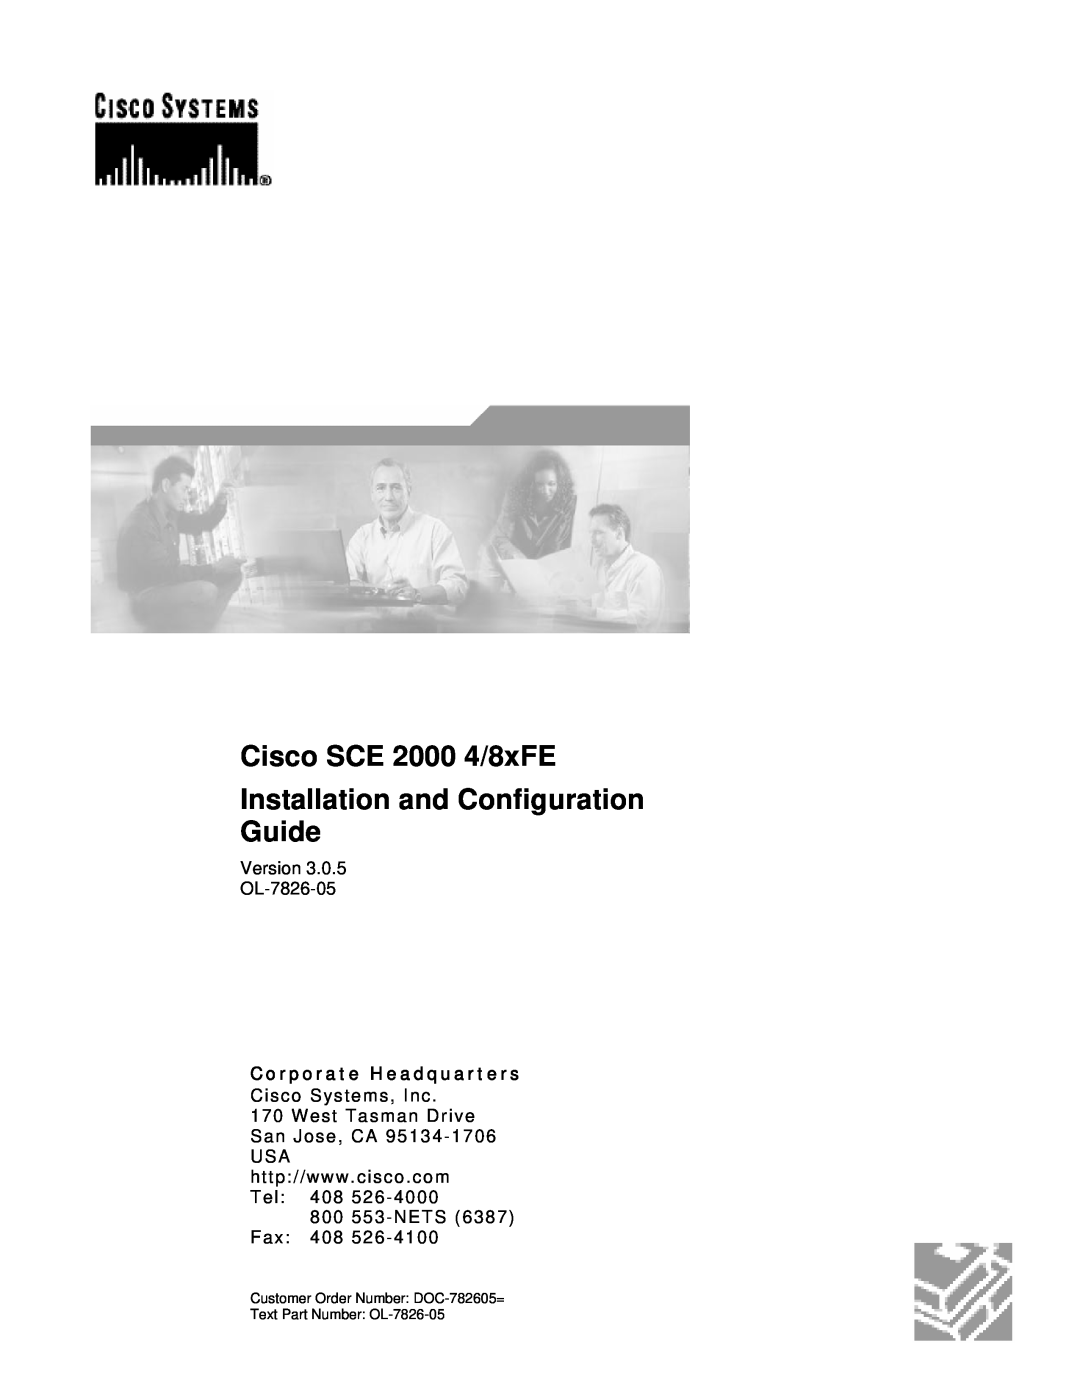 Cisco Systems manual Cisco SCE 2000 4/8xFE Installation and Configuration Guide, Version OL-7826-05 